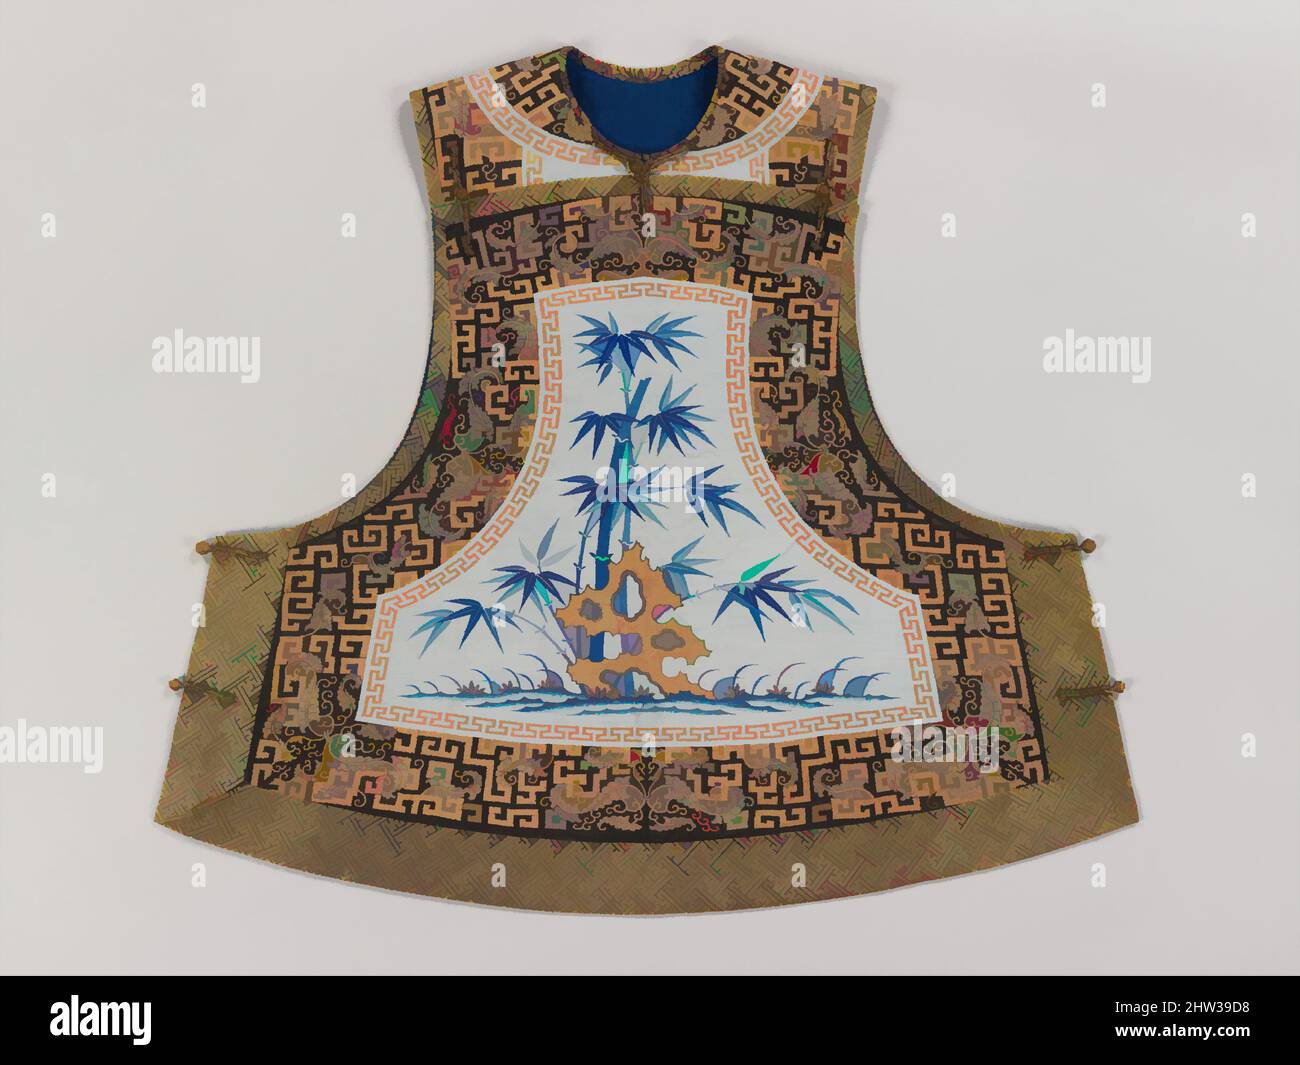 Art inspired by Woman's Sleeveless Jacket with Bamboo and Rock, Qing dynasty (1644–1911), late 19th century, China, Silk and metallic thread tapestry (kesi), Overall: 28 1/2 x 36 in. (72.4 x 91.4 cm), Costumes-Tapestries, This type of sleevless jacket was worn by members of the Qing, Classic works modernized by Artotop with a splash of modernity. Shapes, color and value, eye-catching visual impact on art. Emotions through freedom of artworks in a contemporary way. A timeless message pursuing a wildly creative new direction. Artists turning to the digital medium and creating the Artotop NFT Stock Photo